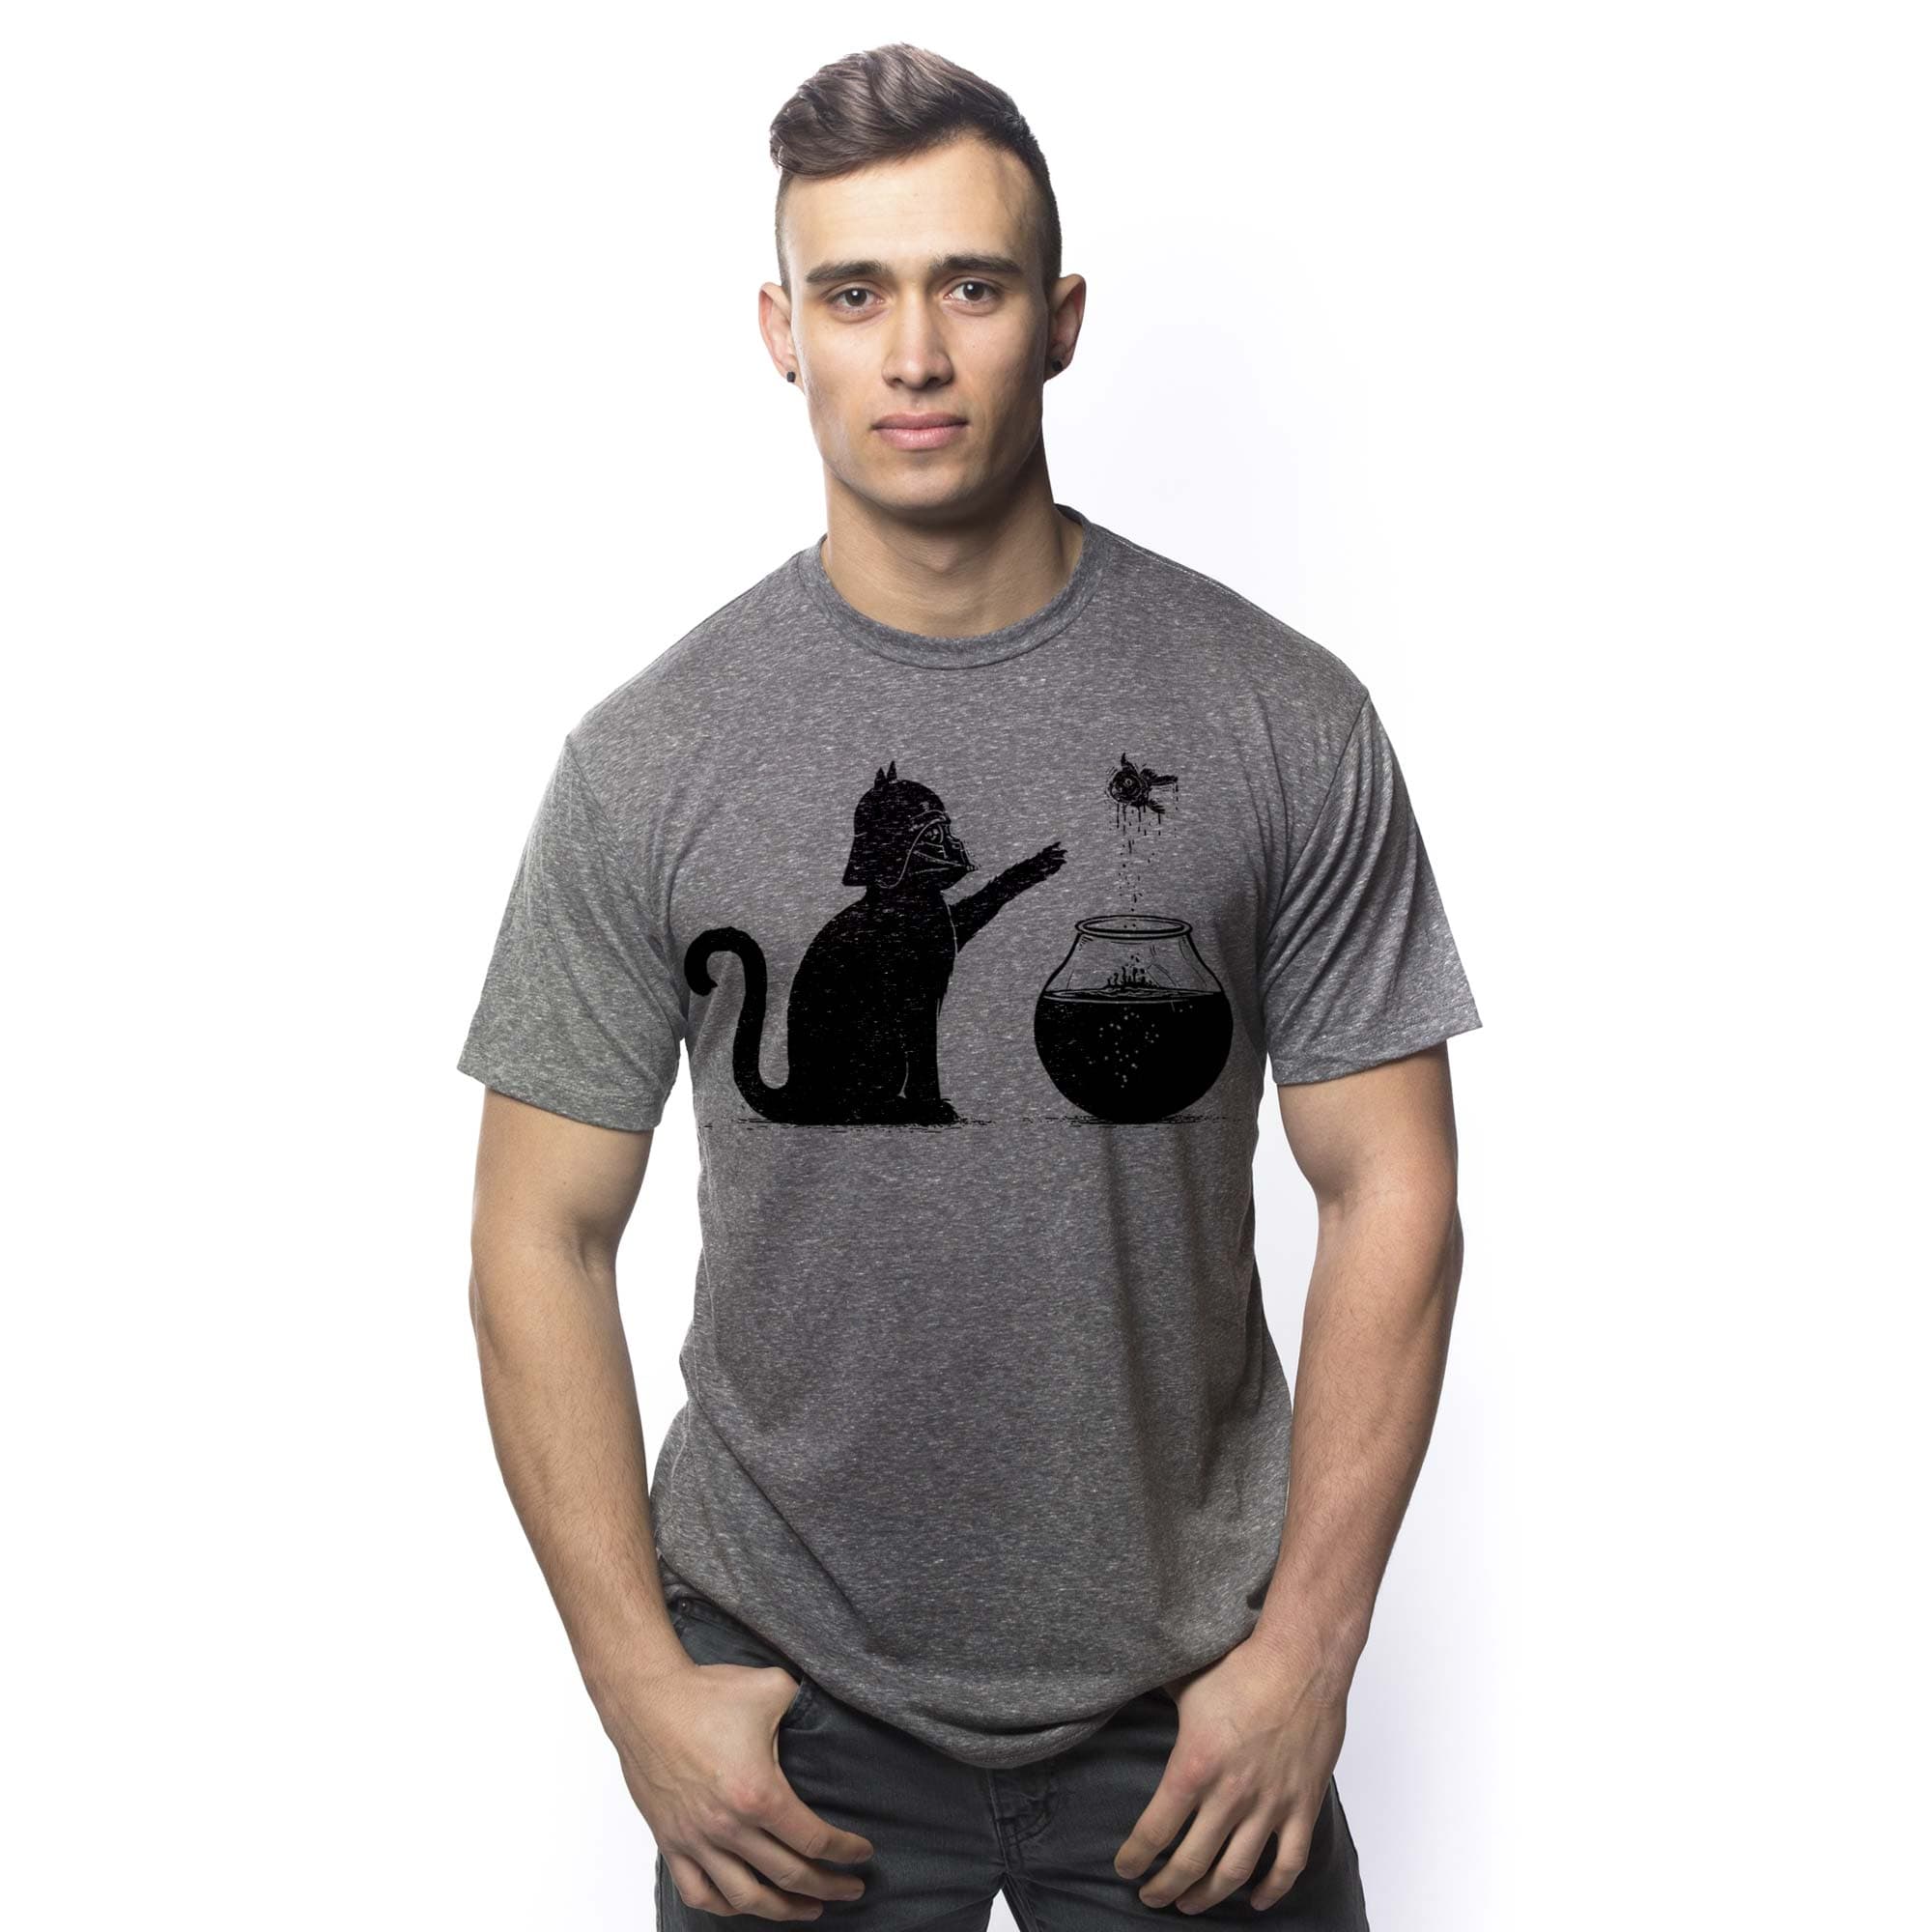 All Too Easy Funny Graphic T-Shirt | Designer Cat Fish Darth Vader Tee Triblend Grey / X-Large